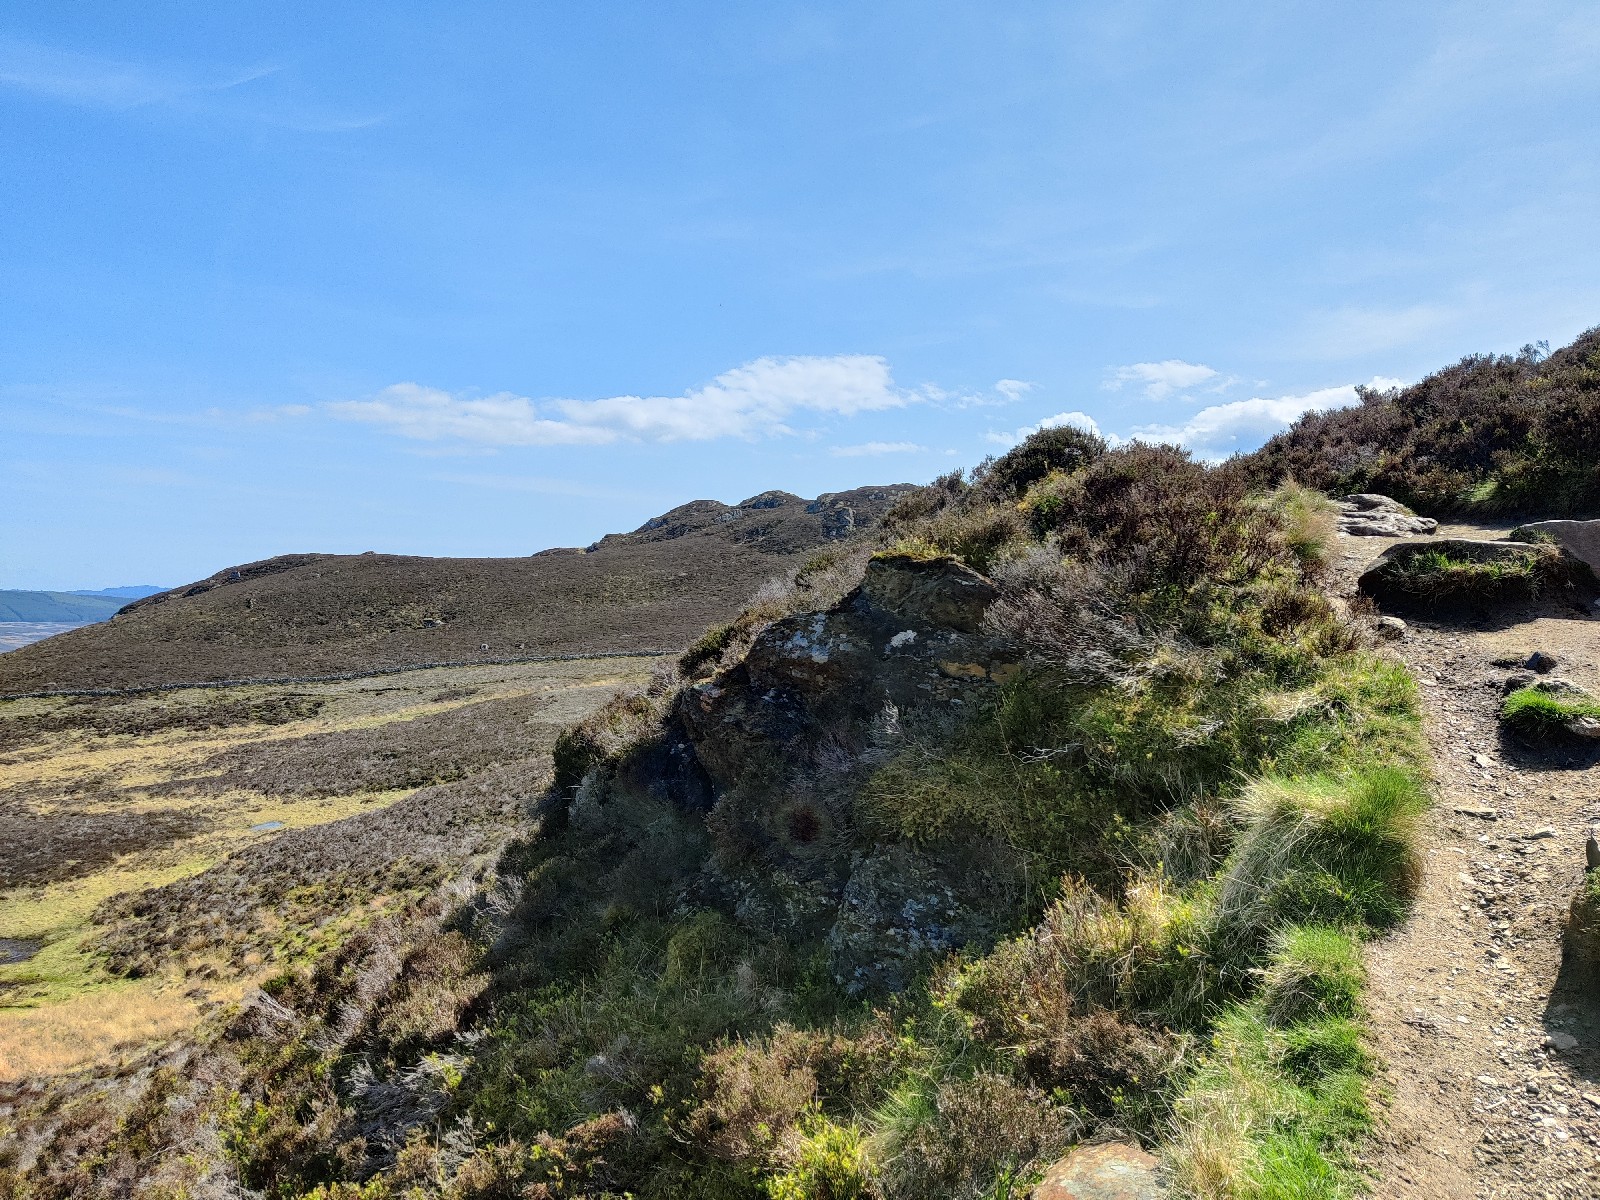 A dirt path winds around a rocky outcrop up on the heath